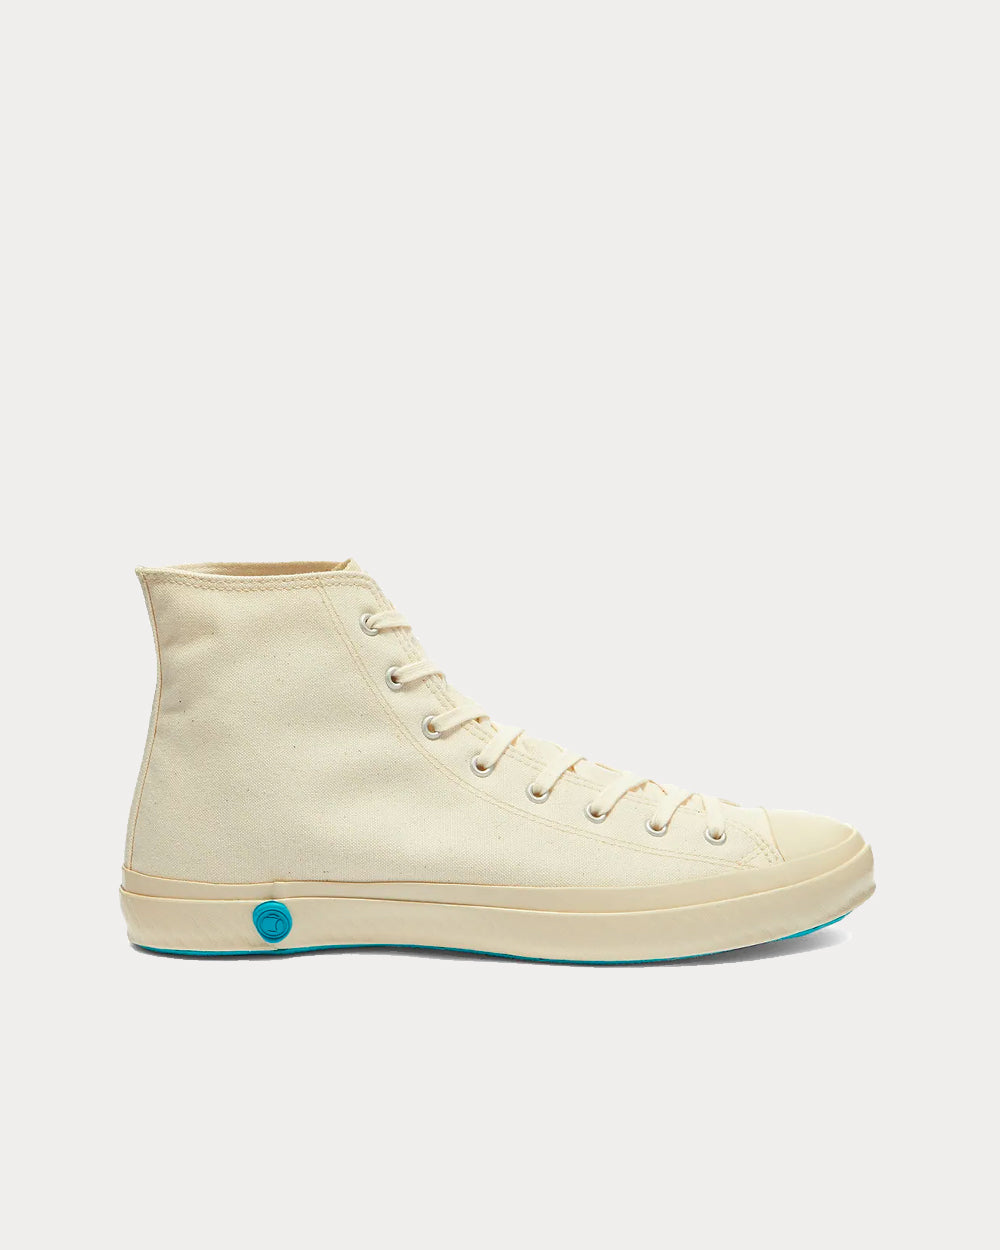 Shoes Like Pottery - 01JP White High Top Sneakers